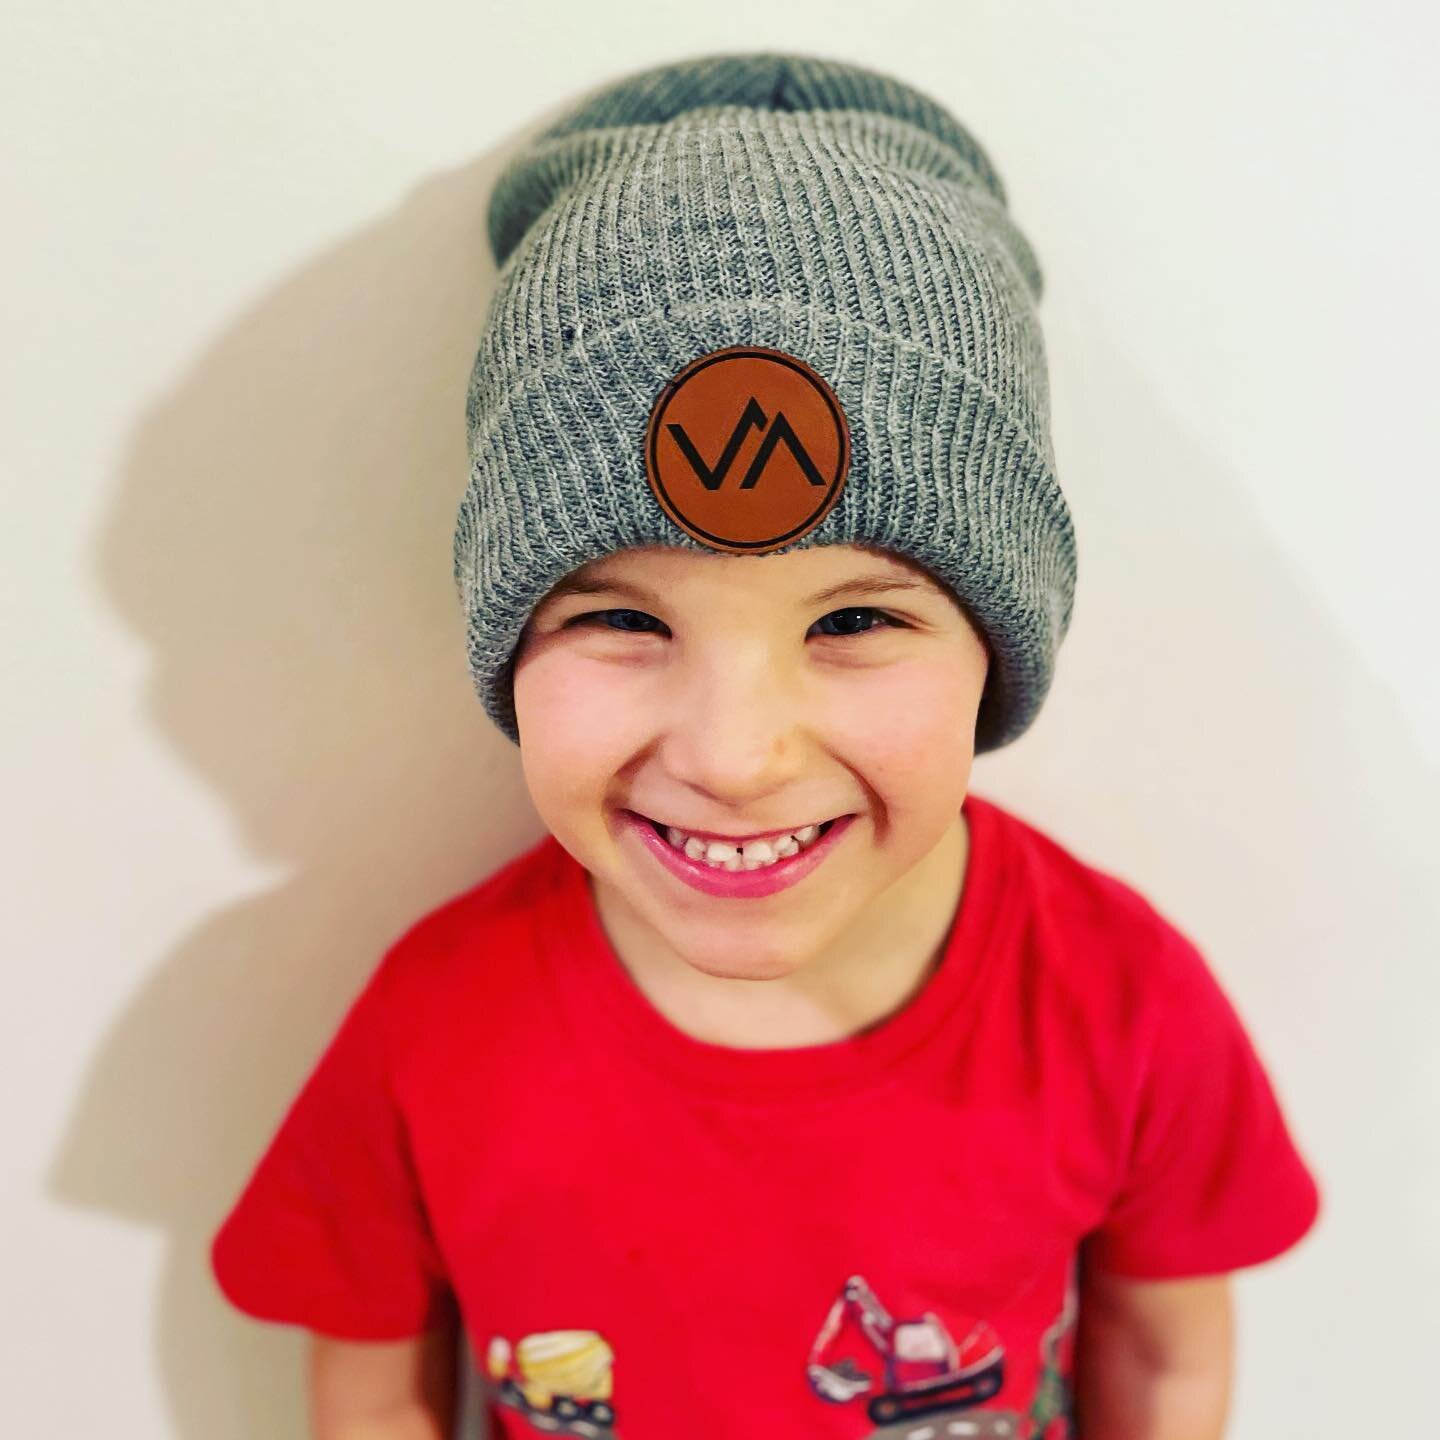 New Elevation merch available in the shop! We&rsquo;ve got hoodies, t-shirts, caps and these sweet beanies.

Disclaimer: We cannot guarantee they&rsquo;ll make you look this cute.

Modelled by Flynn 🤙🏼

#ridewithelevation #bendoregon #snowmobiling 